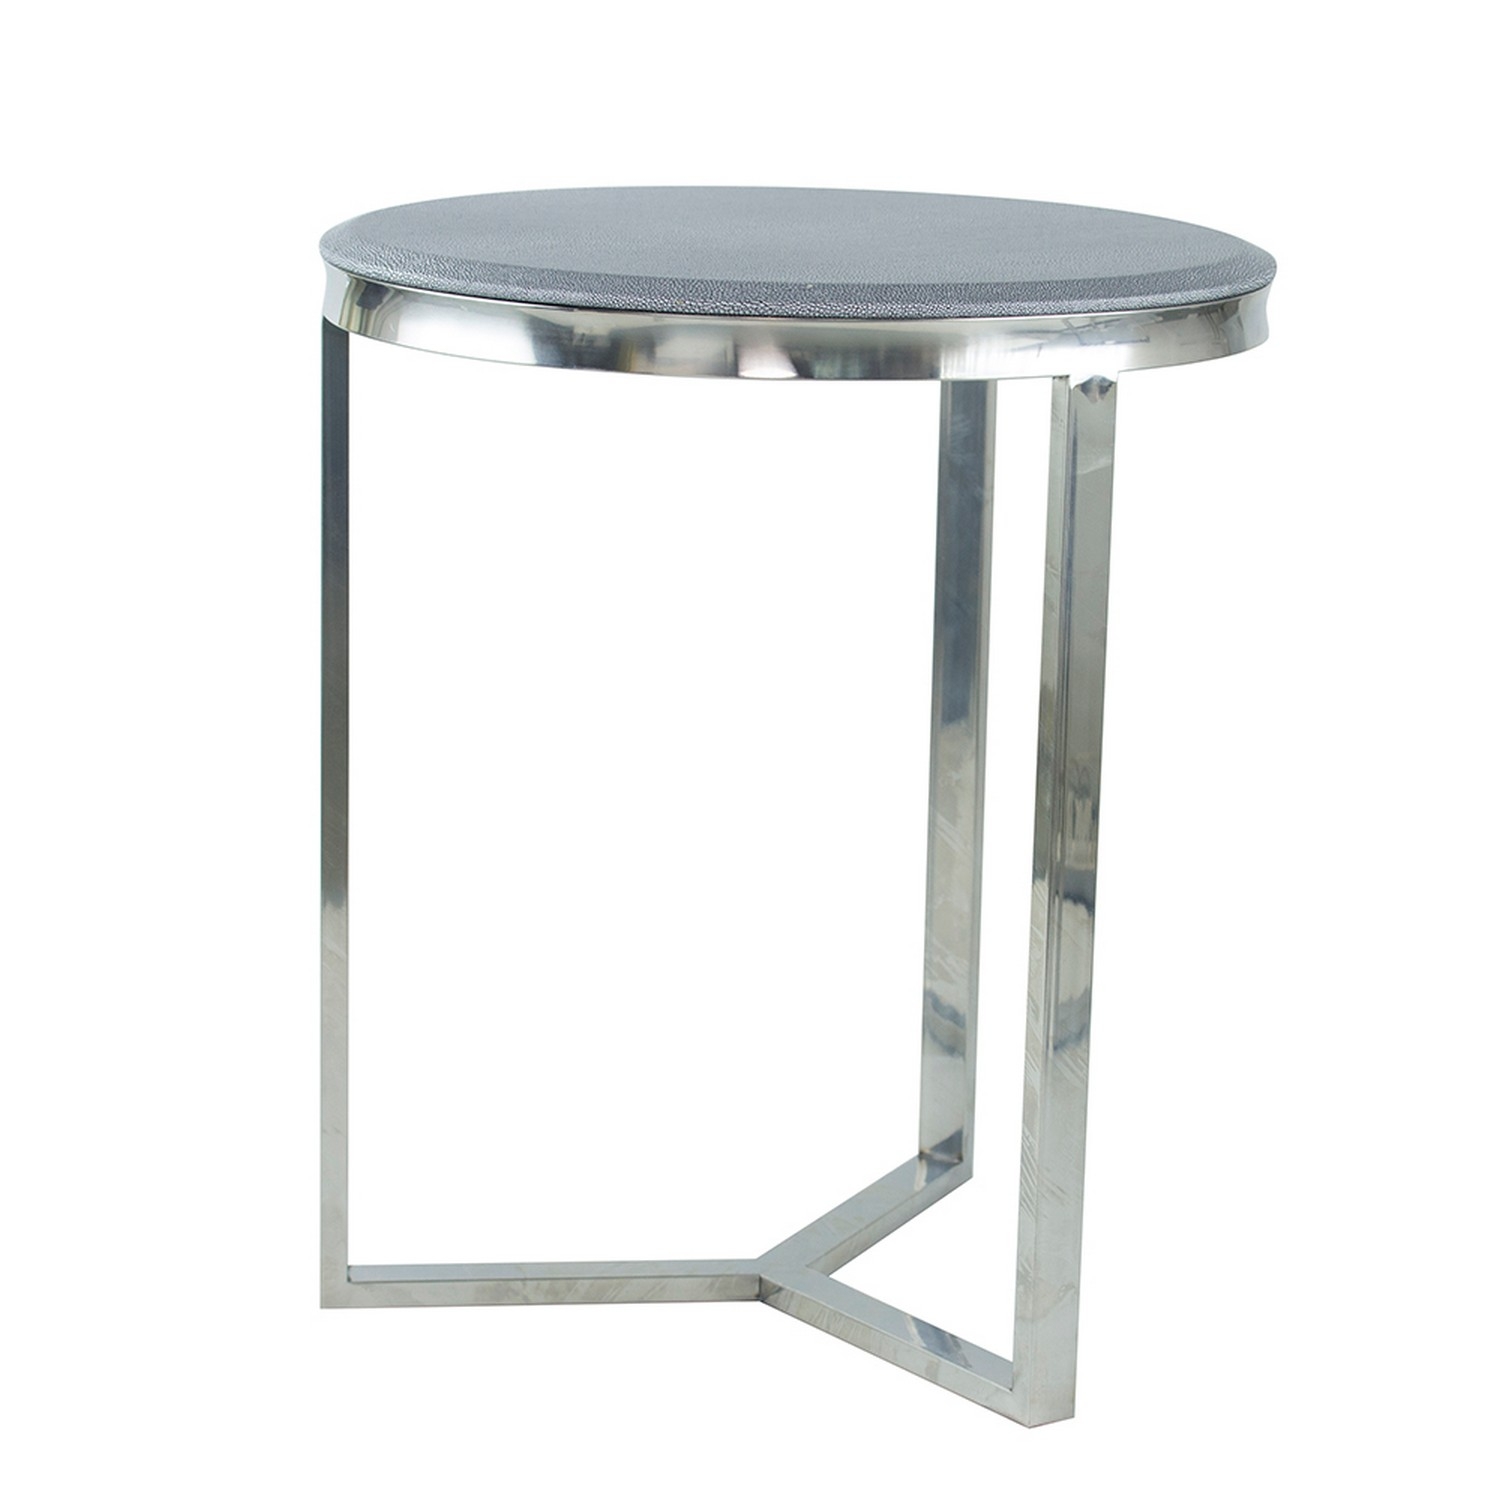 23, 19 Inch Round Nesting Accent Table, Faux Leather Top, Set Of 2, Silver- Saltoro Sherpi